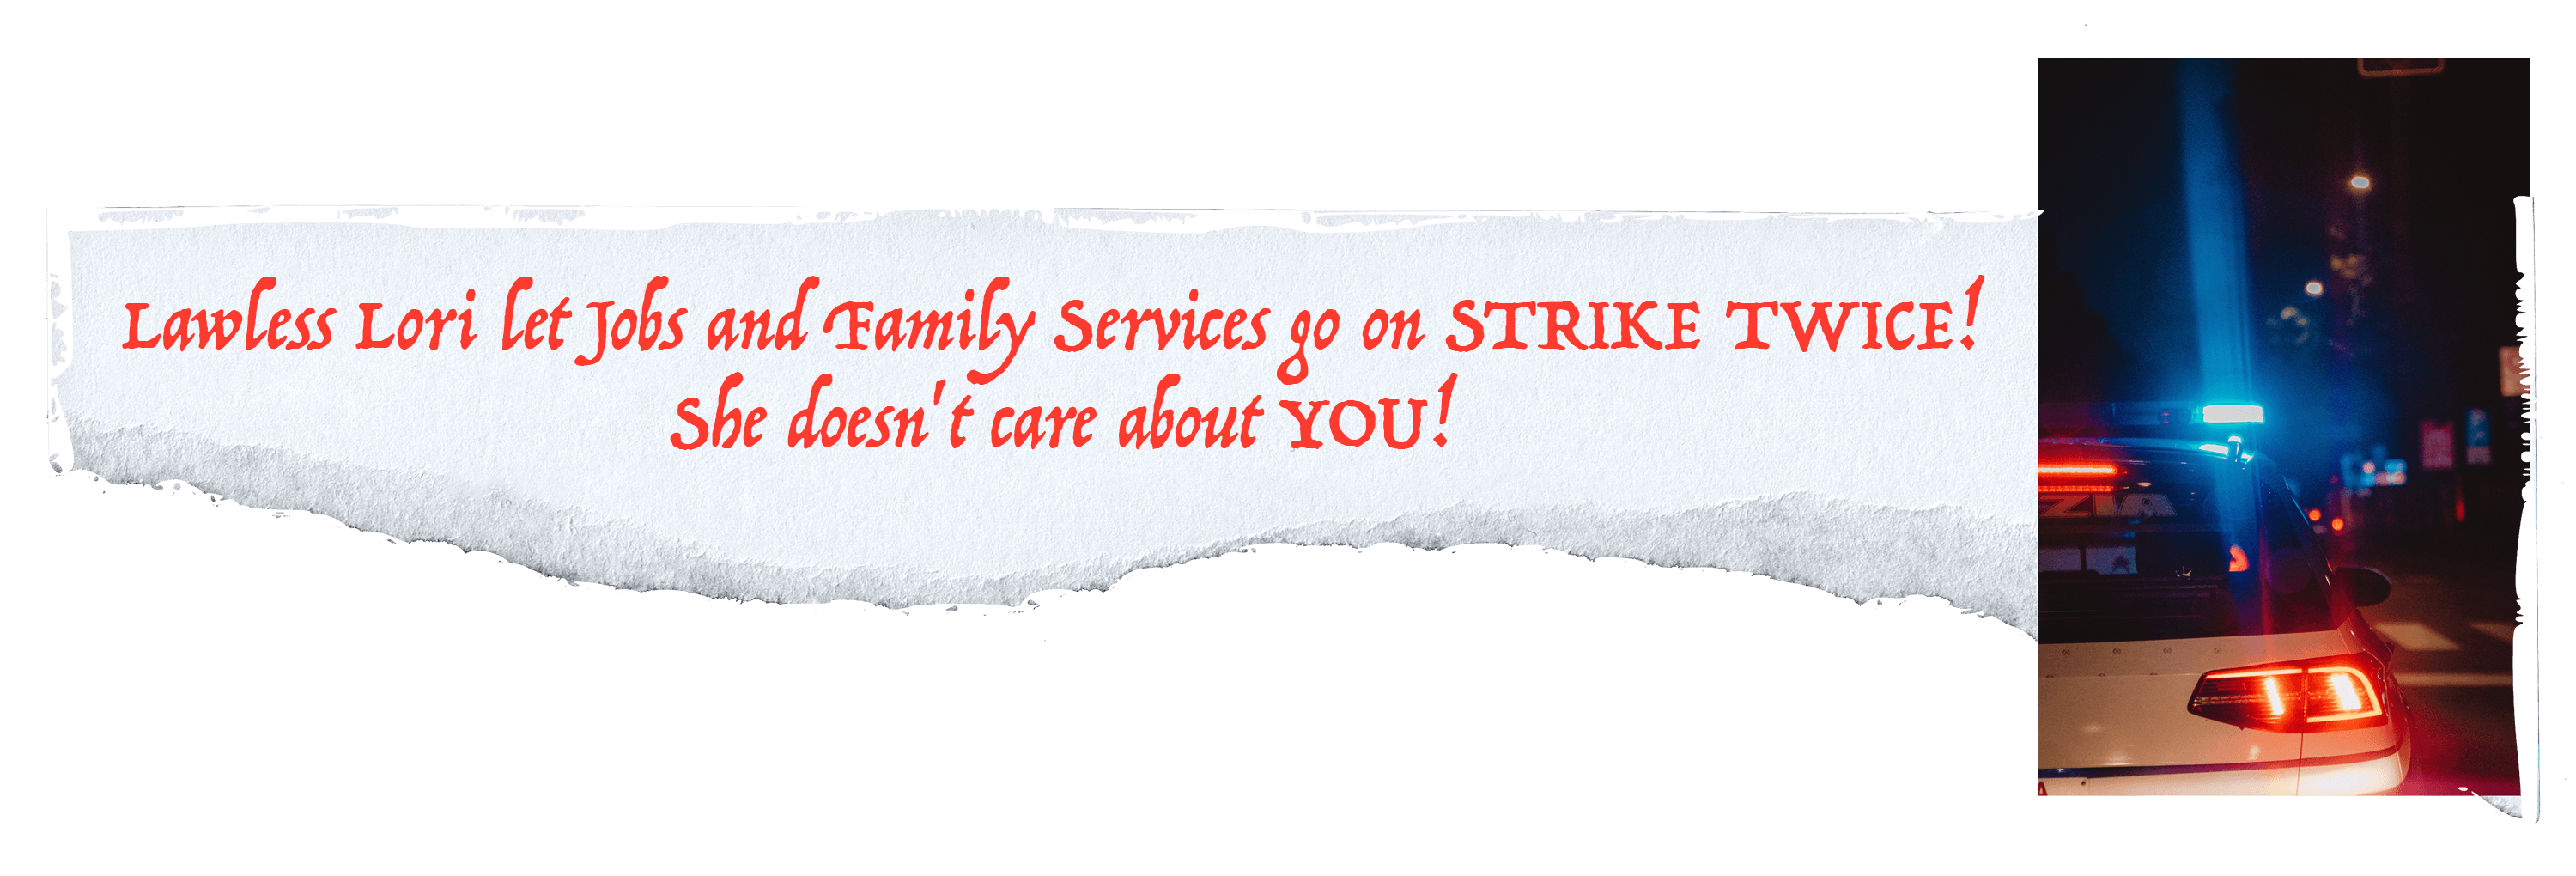 Lawless Lori let Jobs and Family Services go on STRIKE TWICE! She doesn't care about YOU!